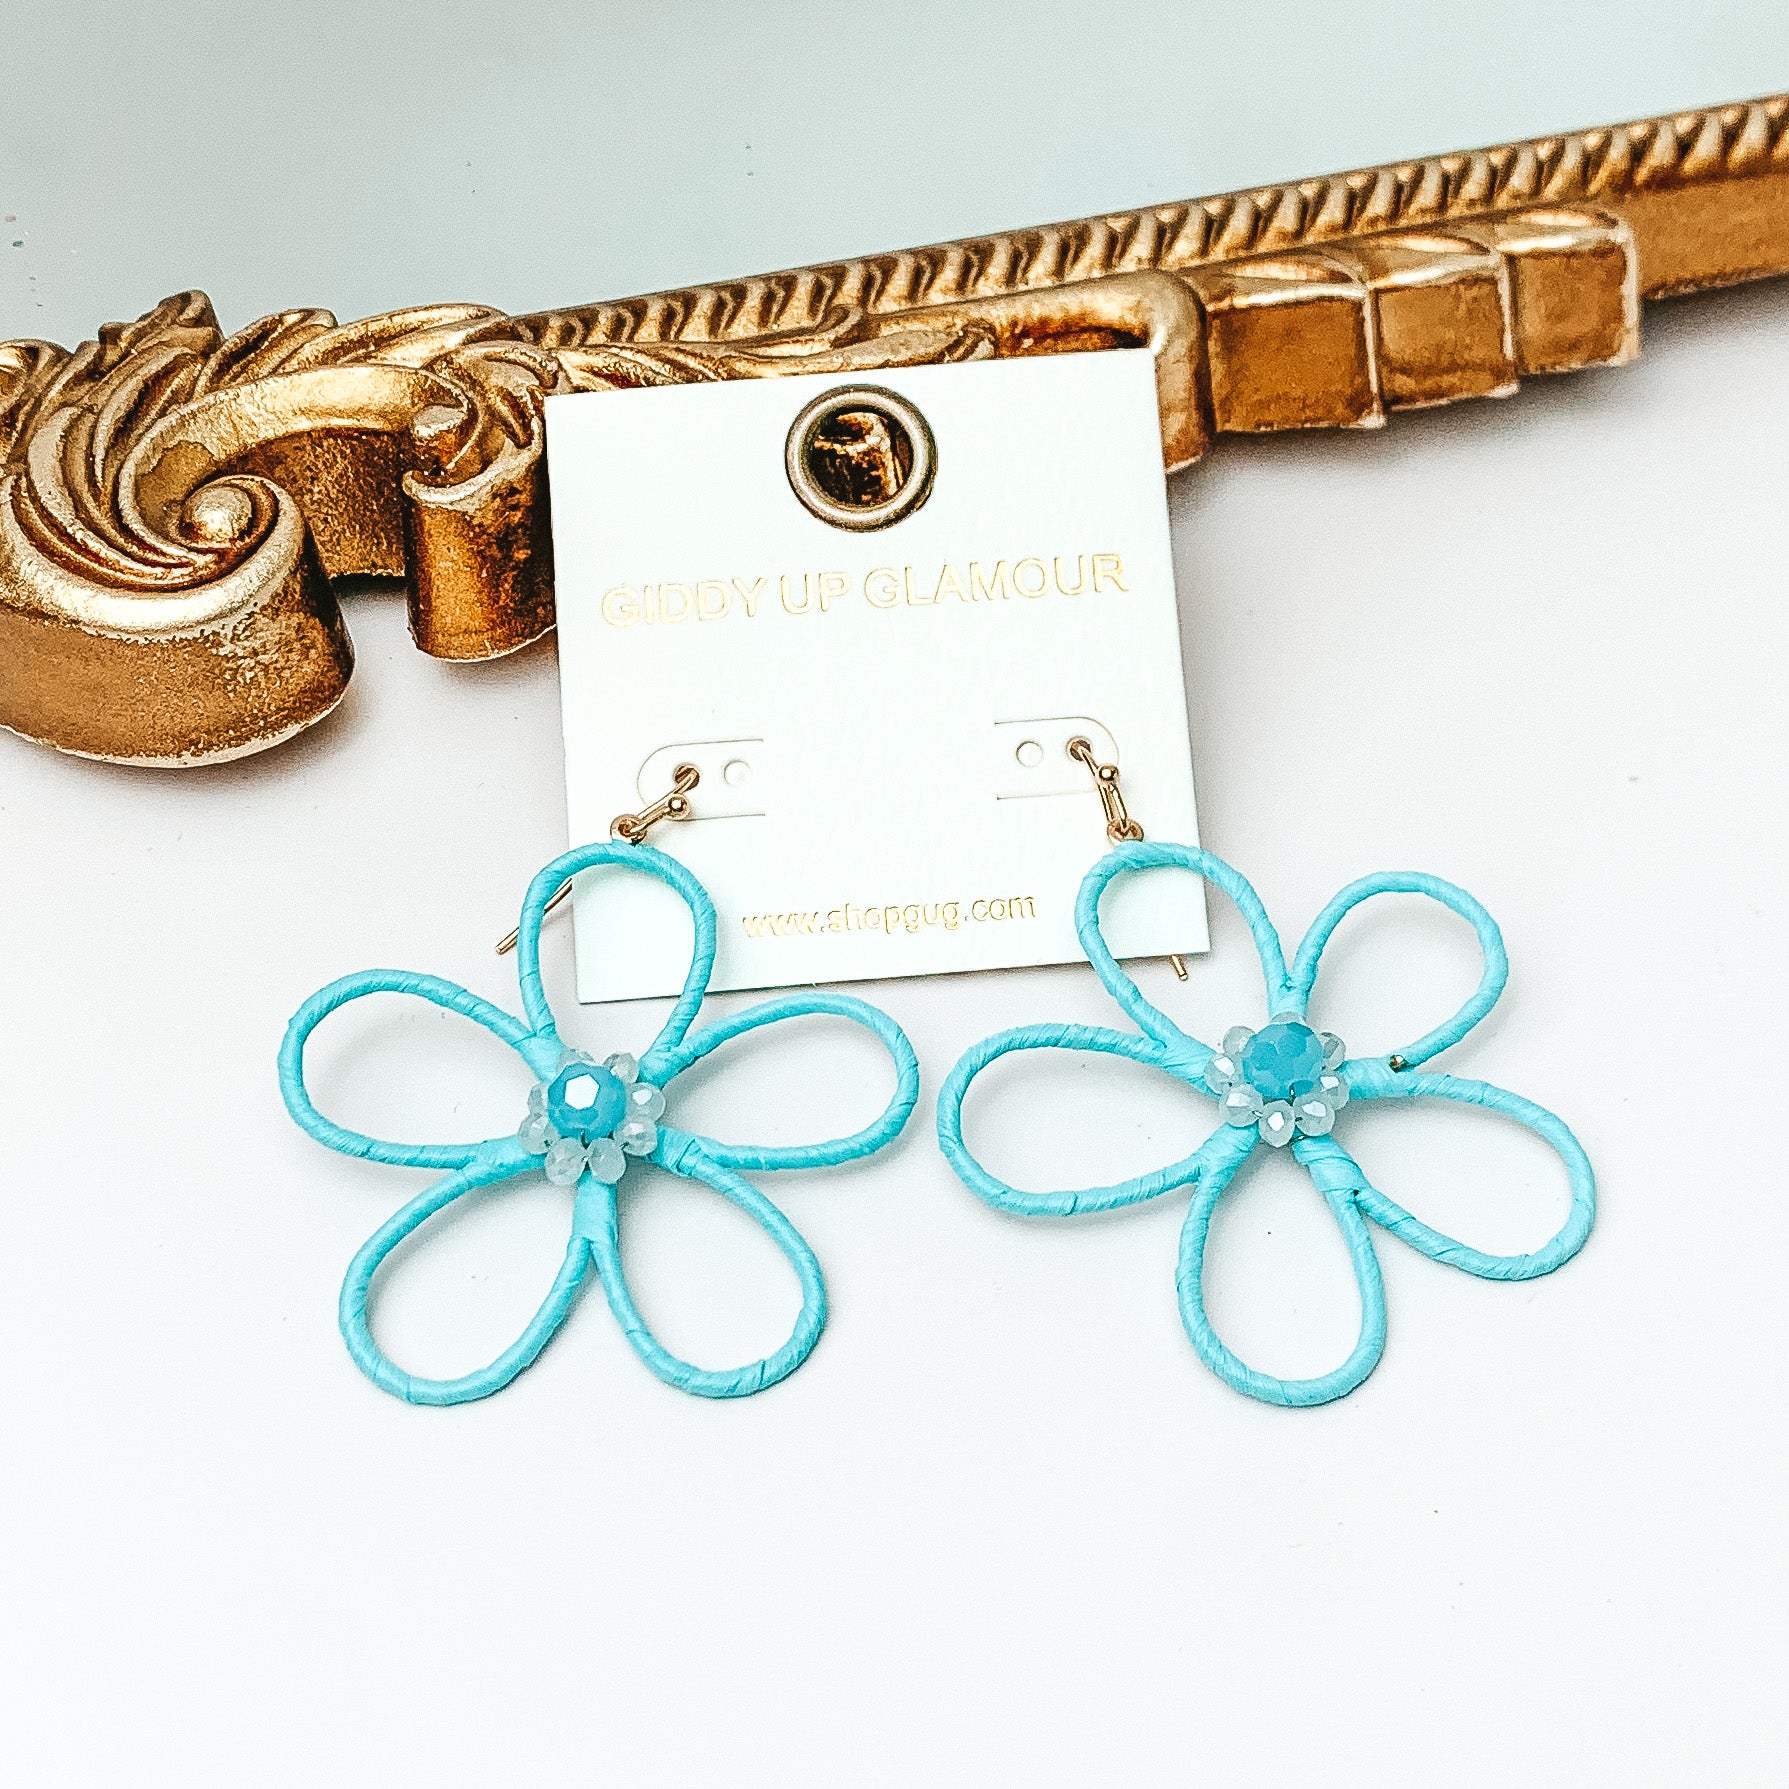 Pictured are gold fish hook earrings with a flower outline pendant. This pendant is pale turuoise and has center pale turquoise crystals. These earrings are pictured in front of a gold mirror on a white background. 